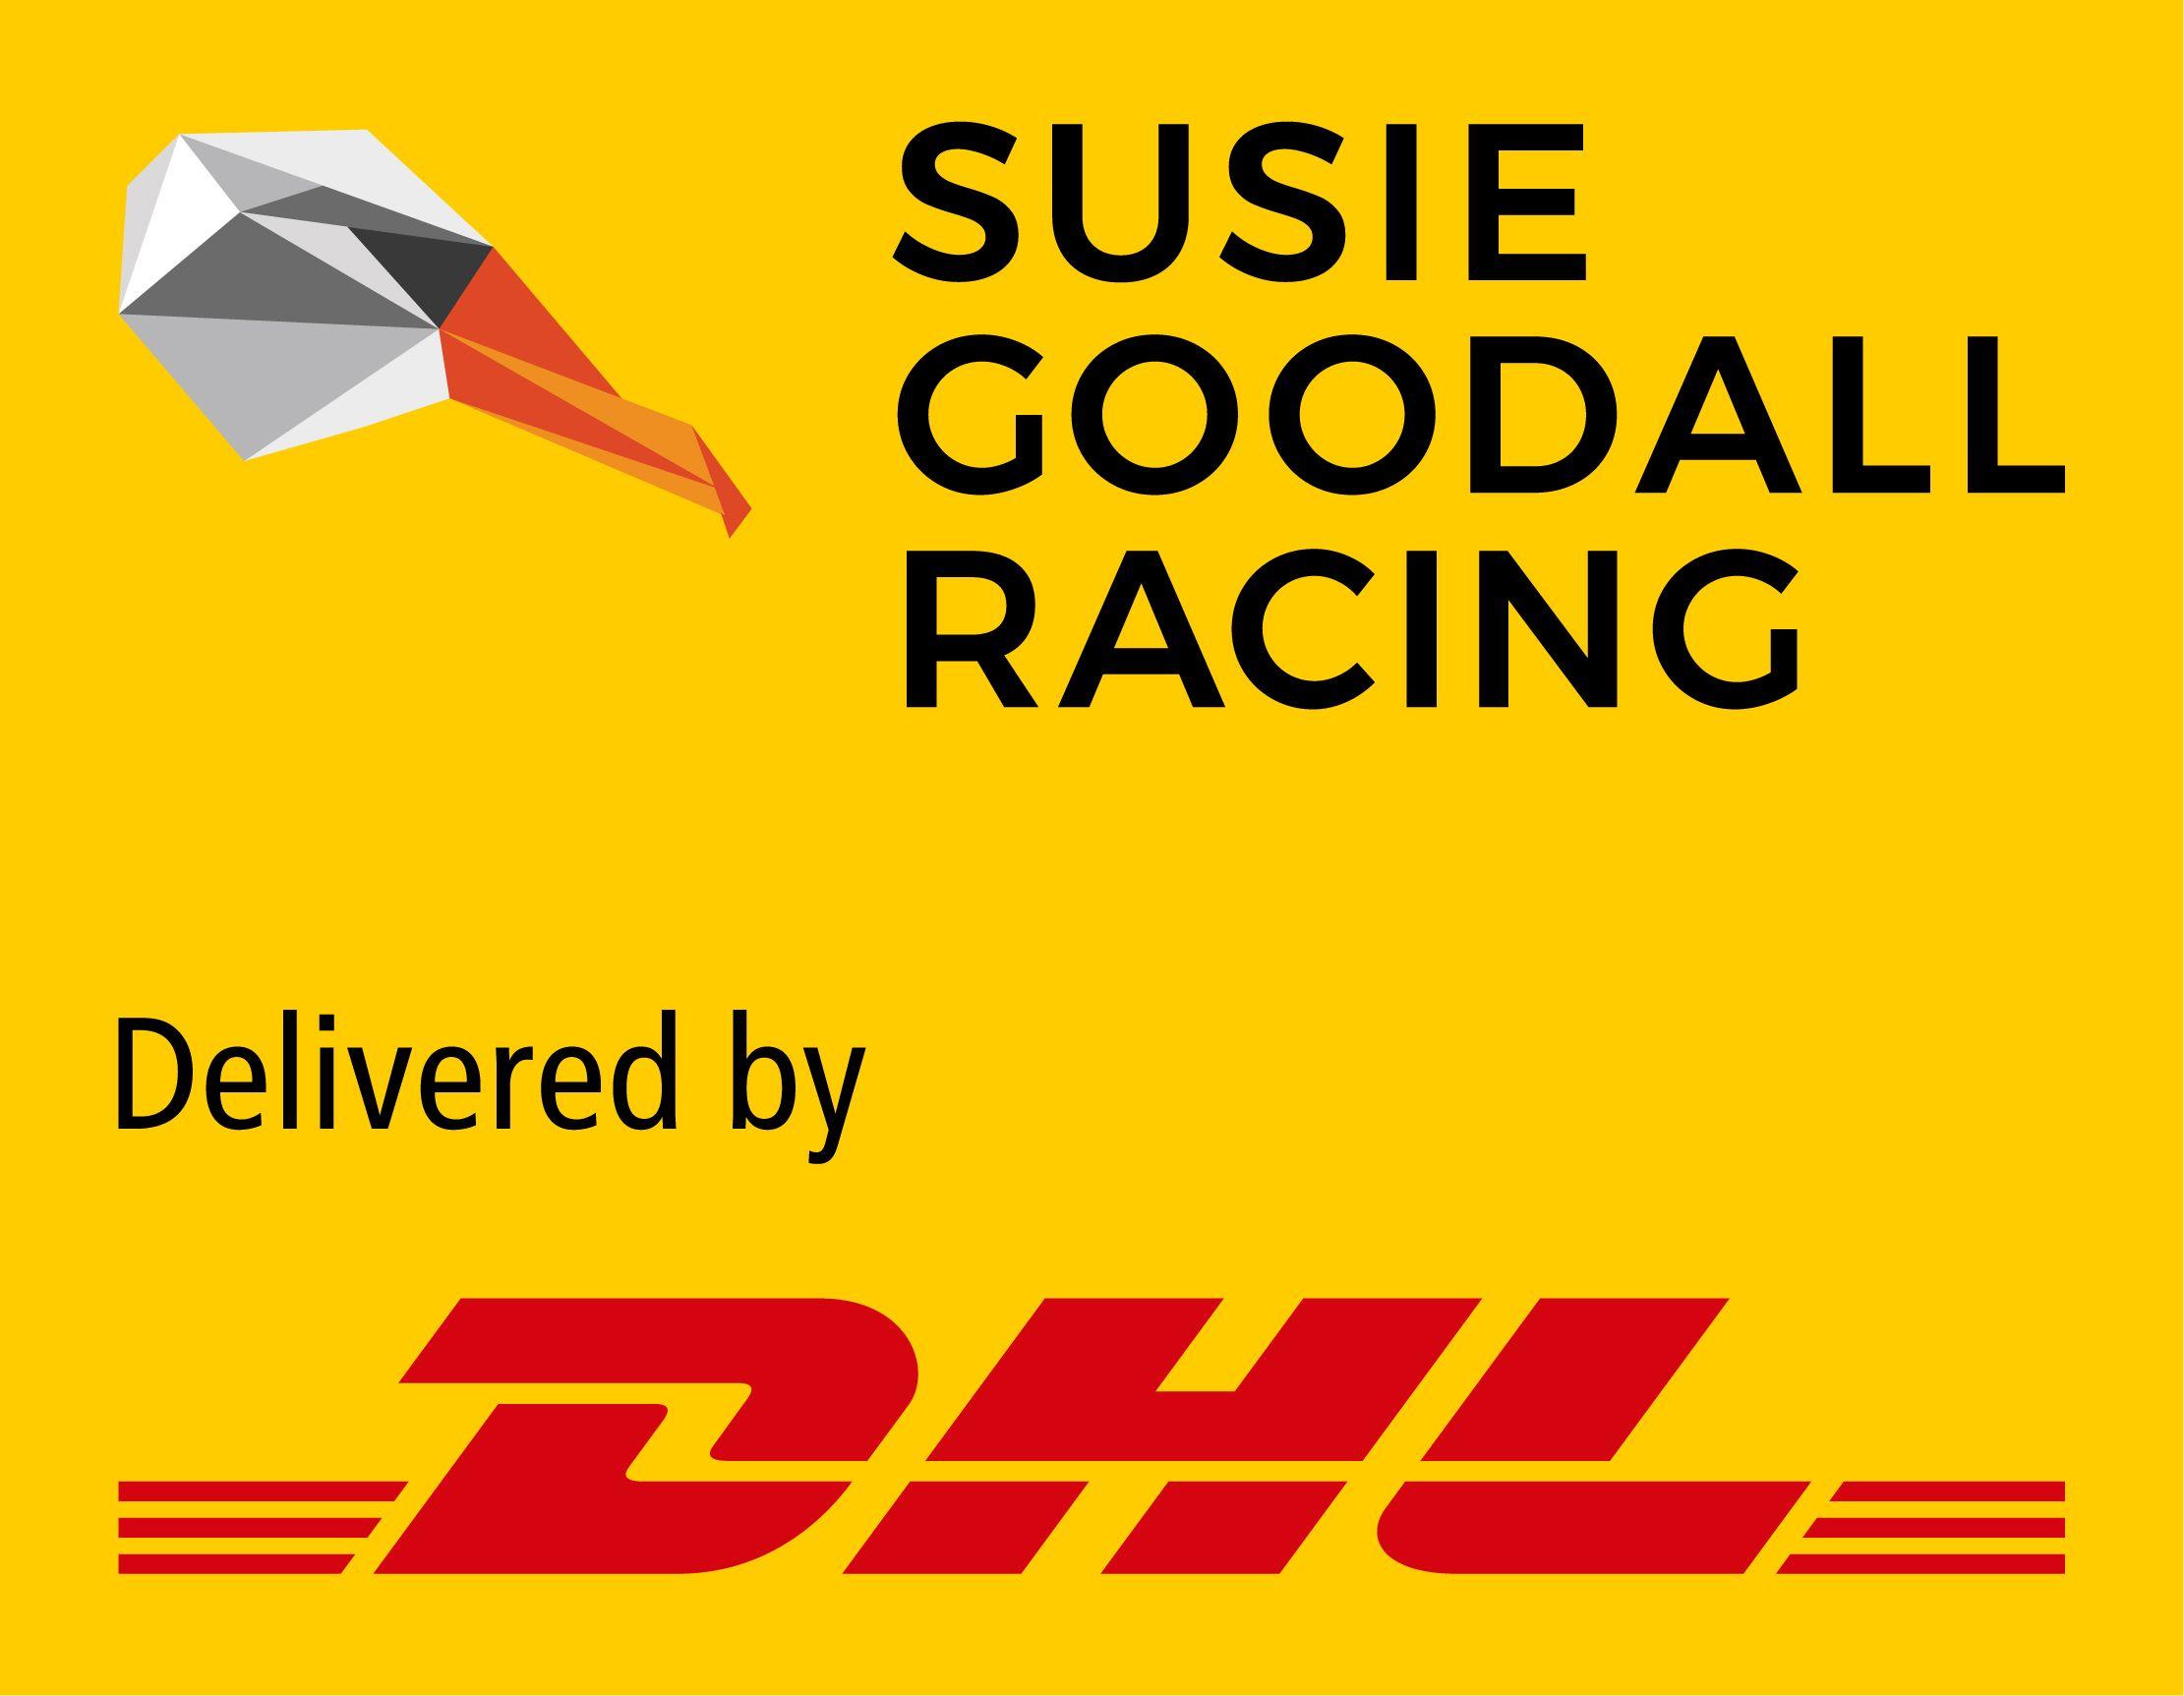 DHL Logo - Susie Goodall secures DHL as primary sponsor - Golden Globe Race